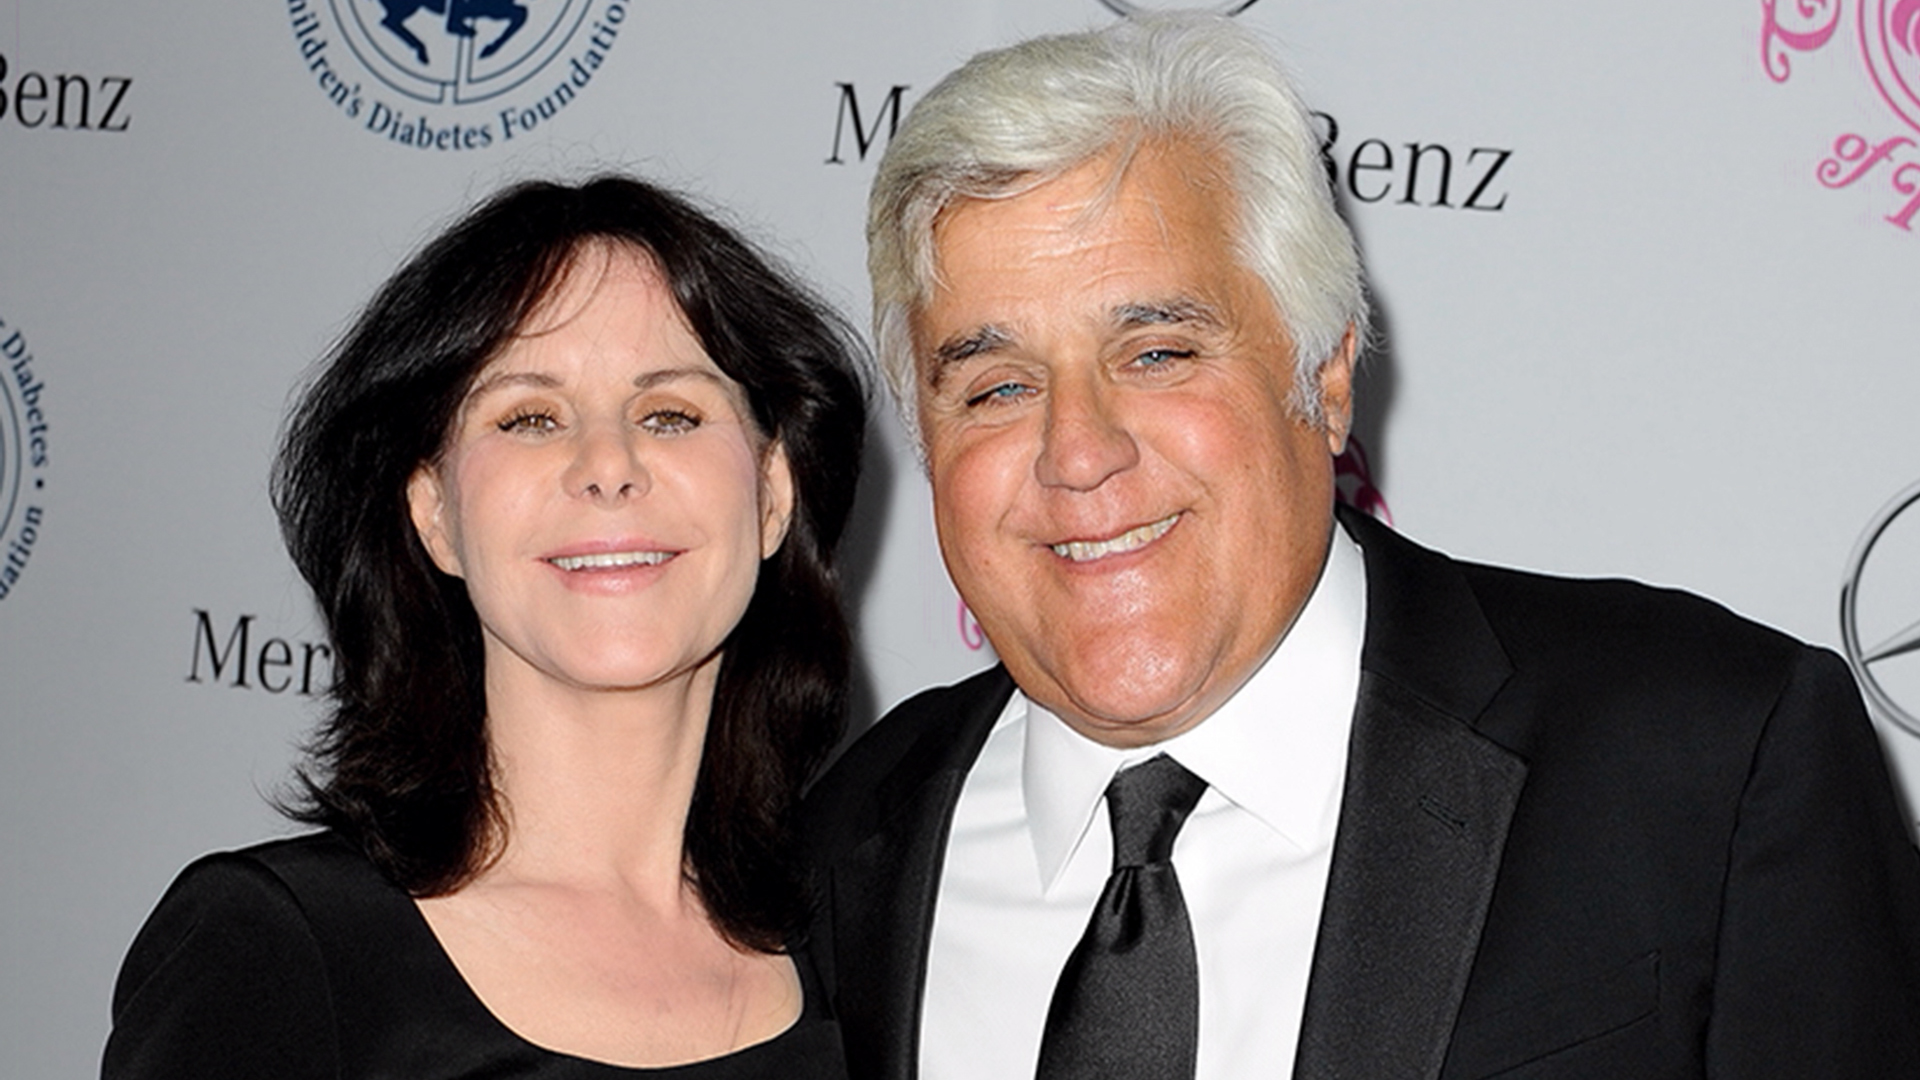 Jay Leno Net Worth Is He Very Rich Personality?